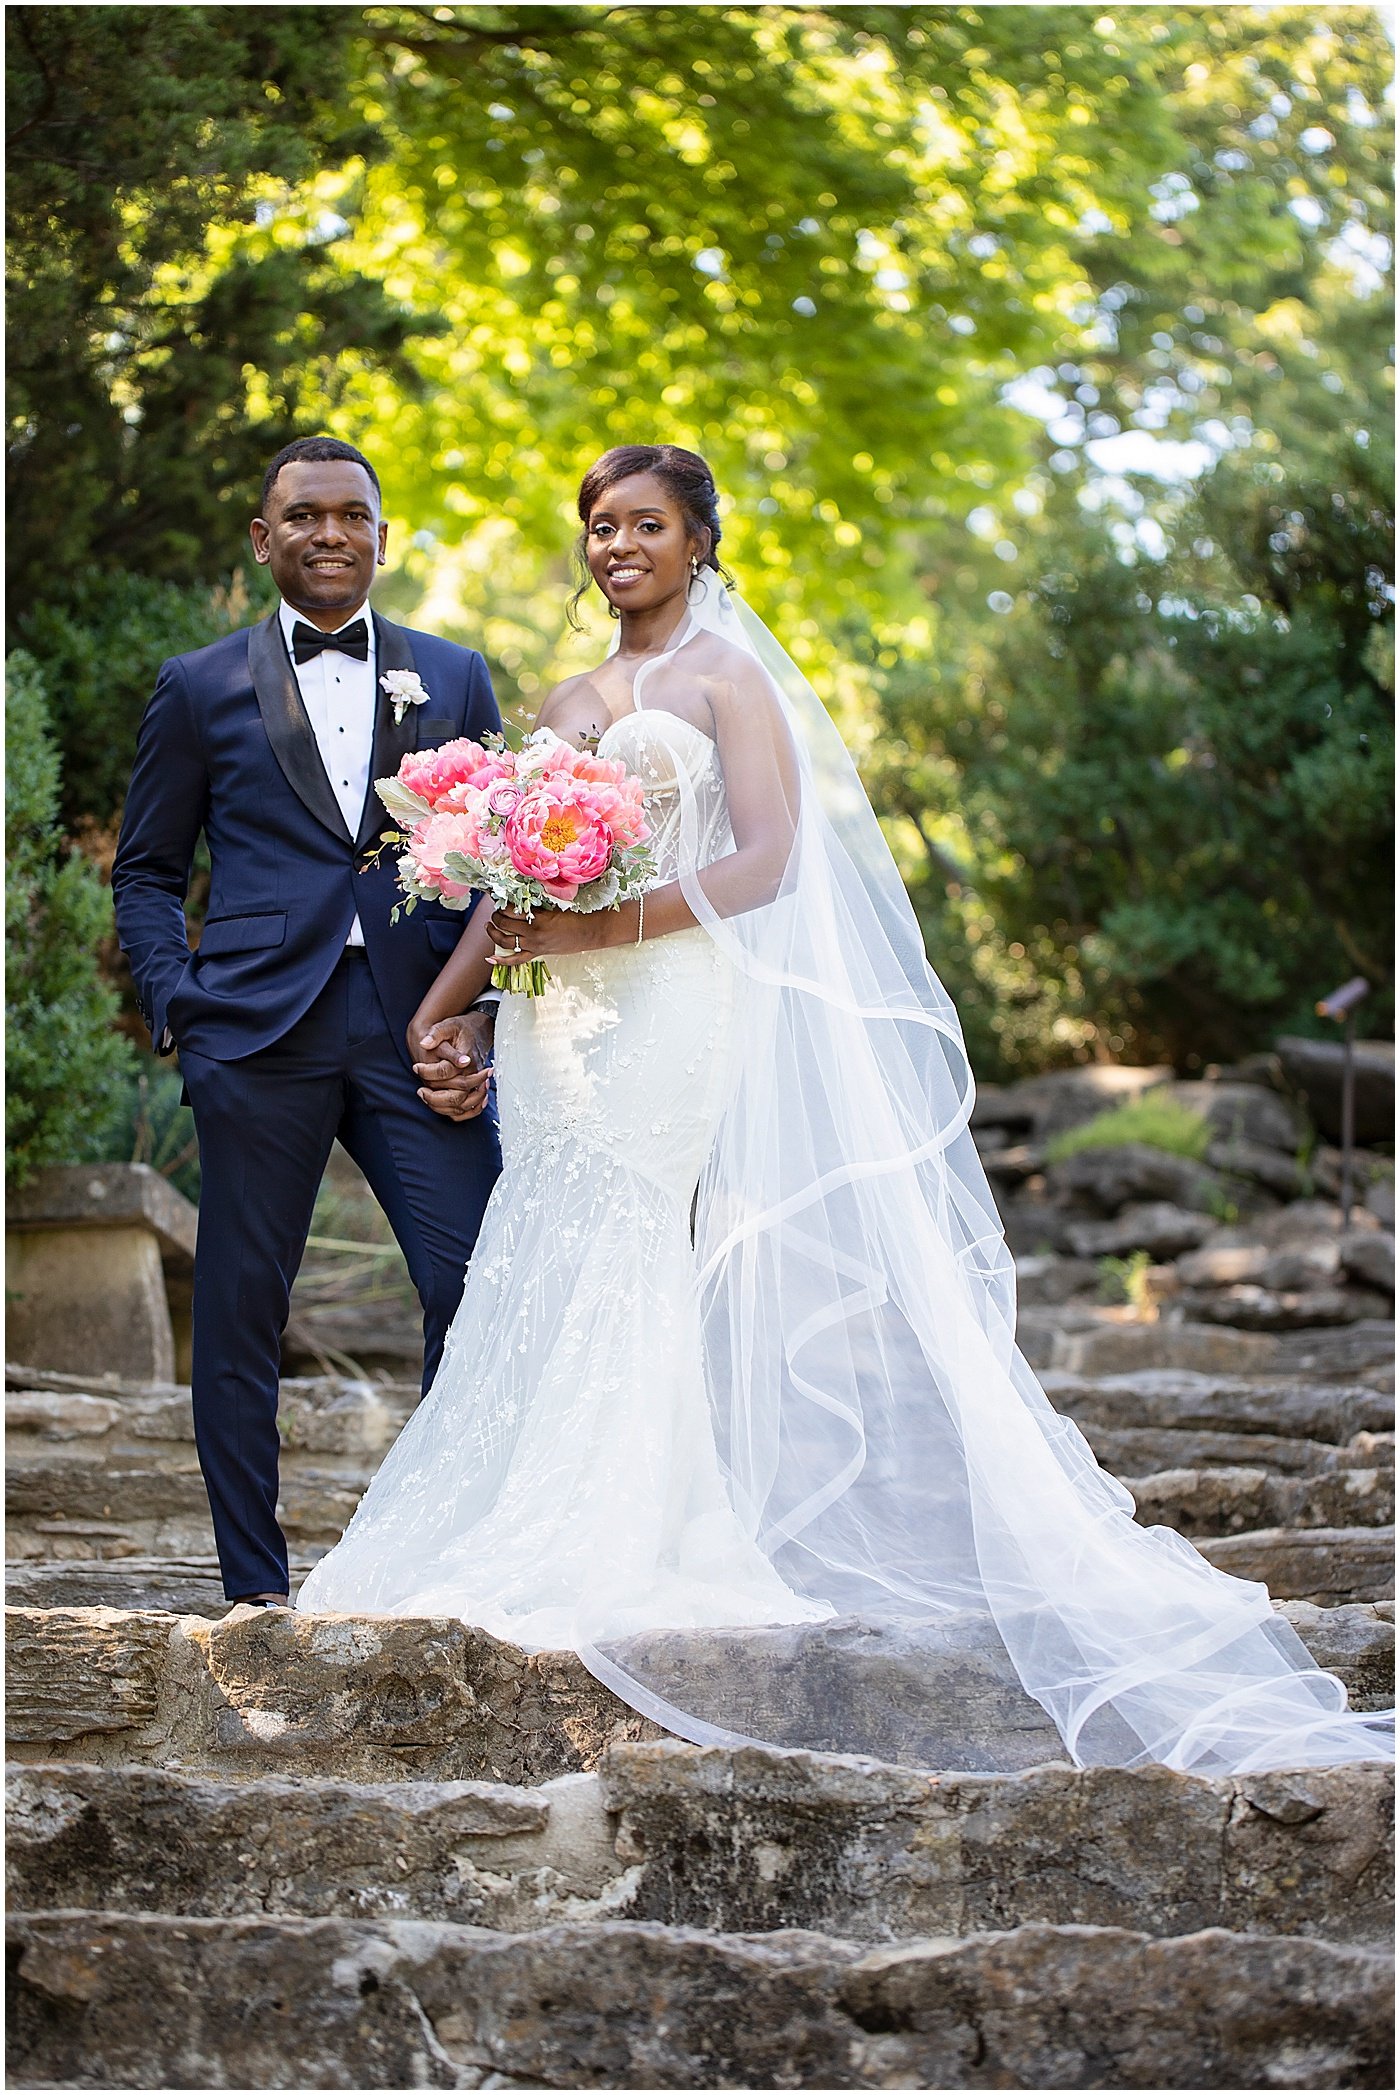 Bride and groom with peonies bouquet at Cheekwood Estate and Gardens Wedding